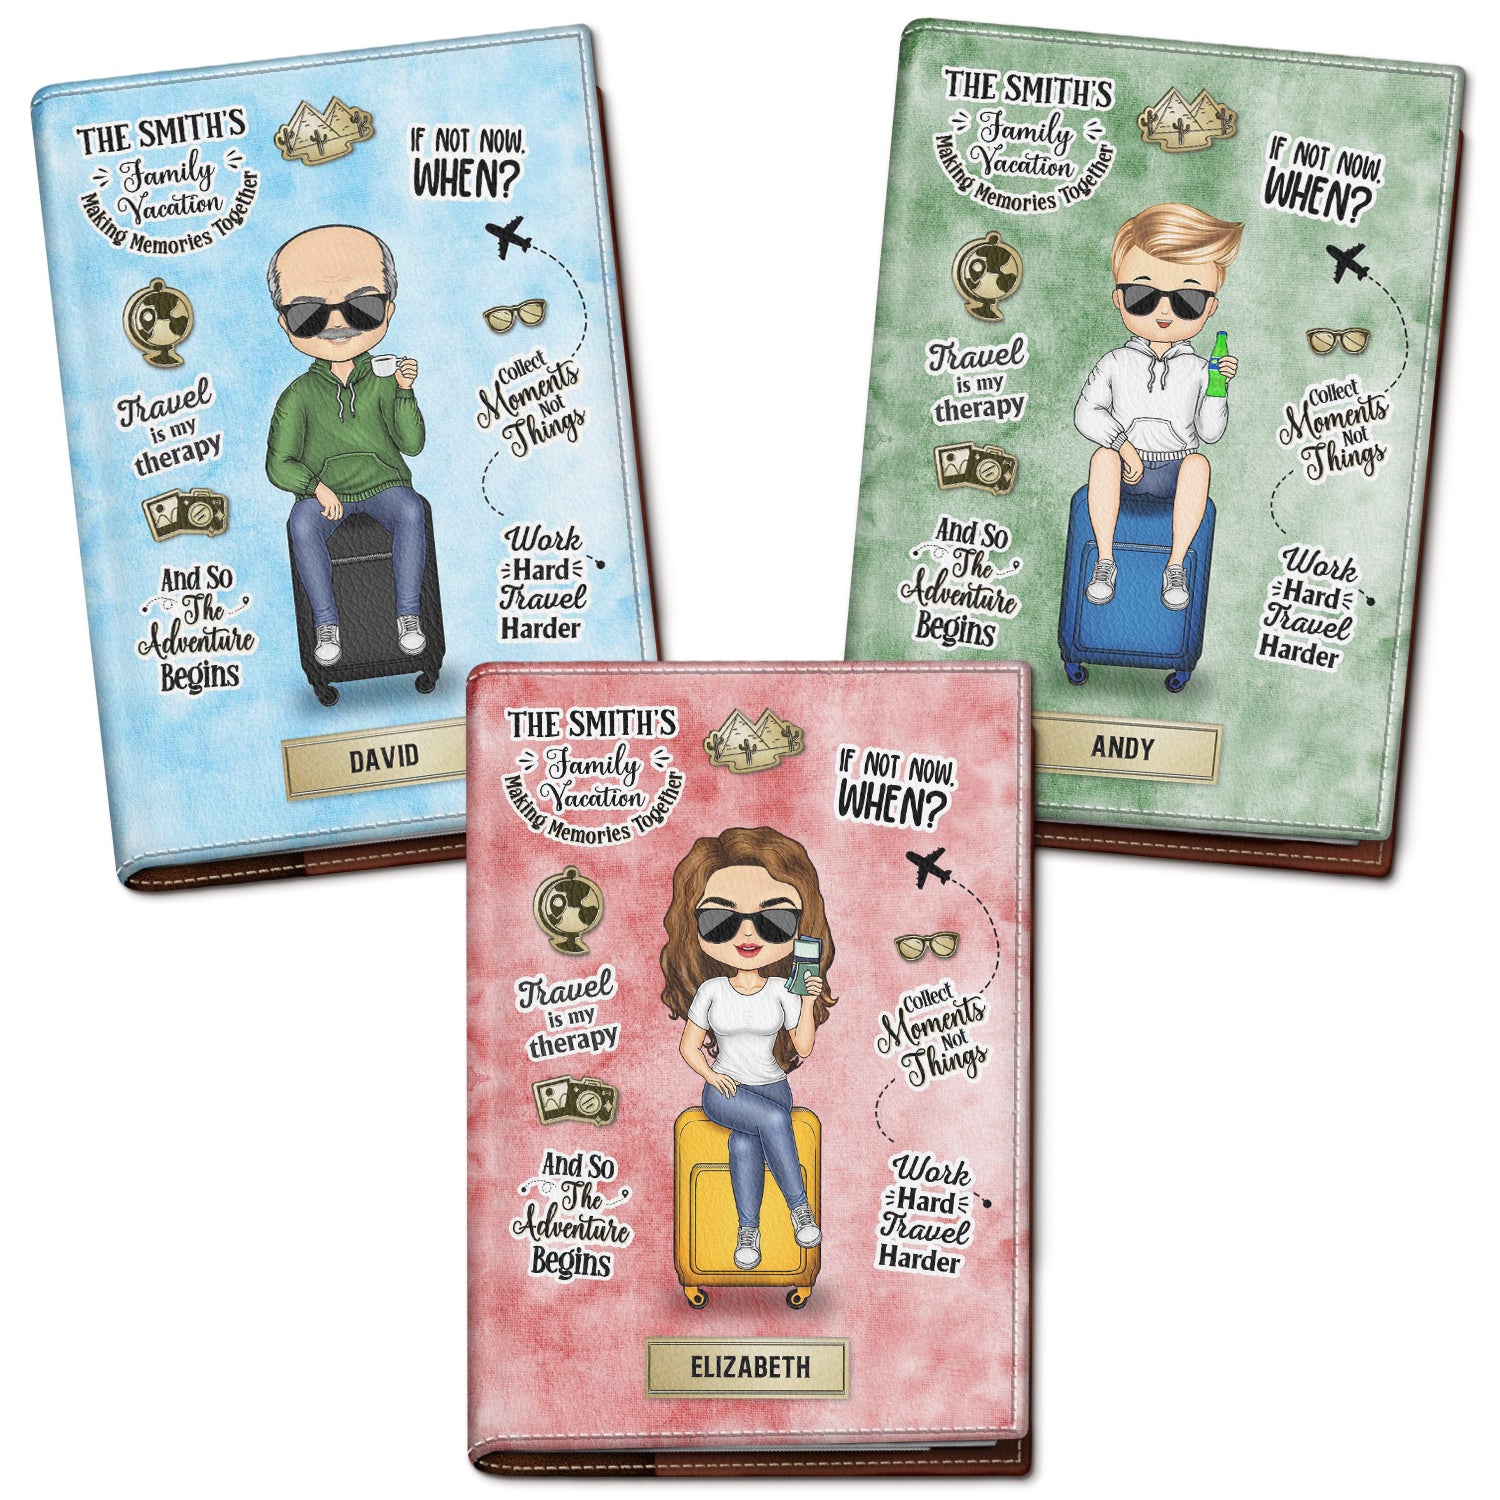 Buy Personalized Rawhide Passport Cover — Way Up Gifts